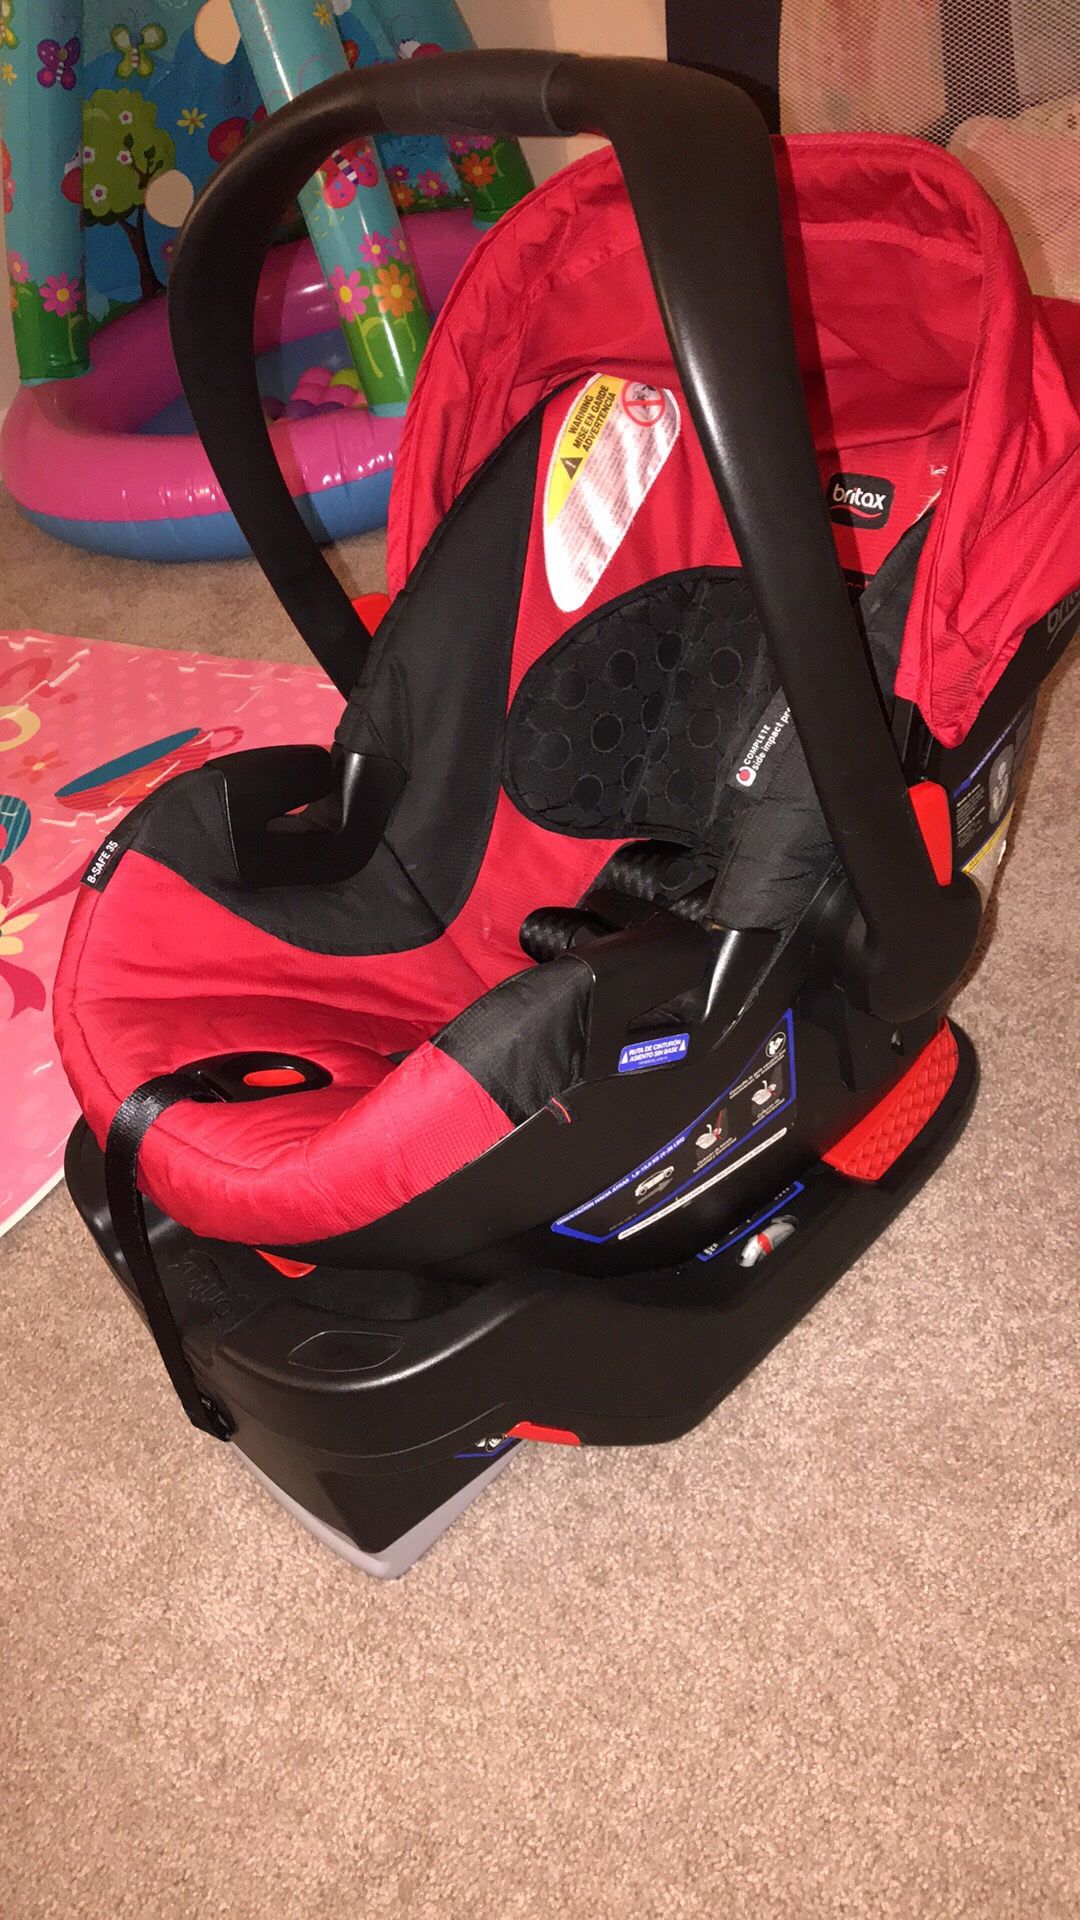 Britax B-Safe 35 Infant Car Seat with base